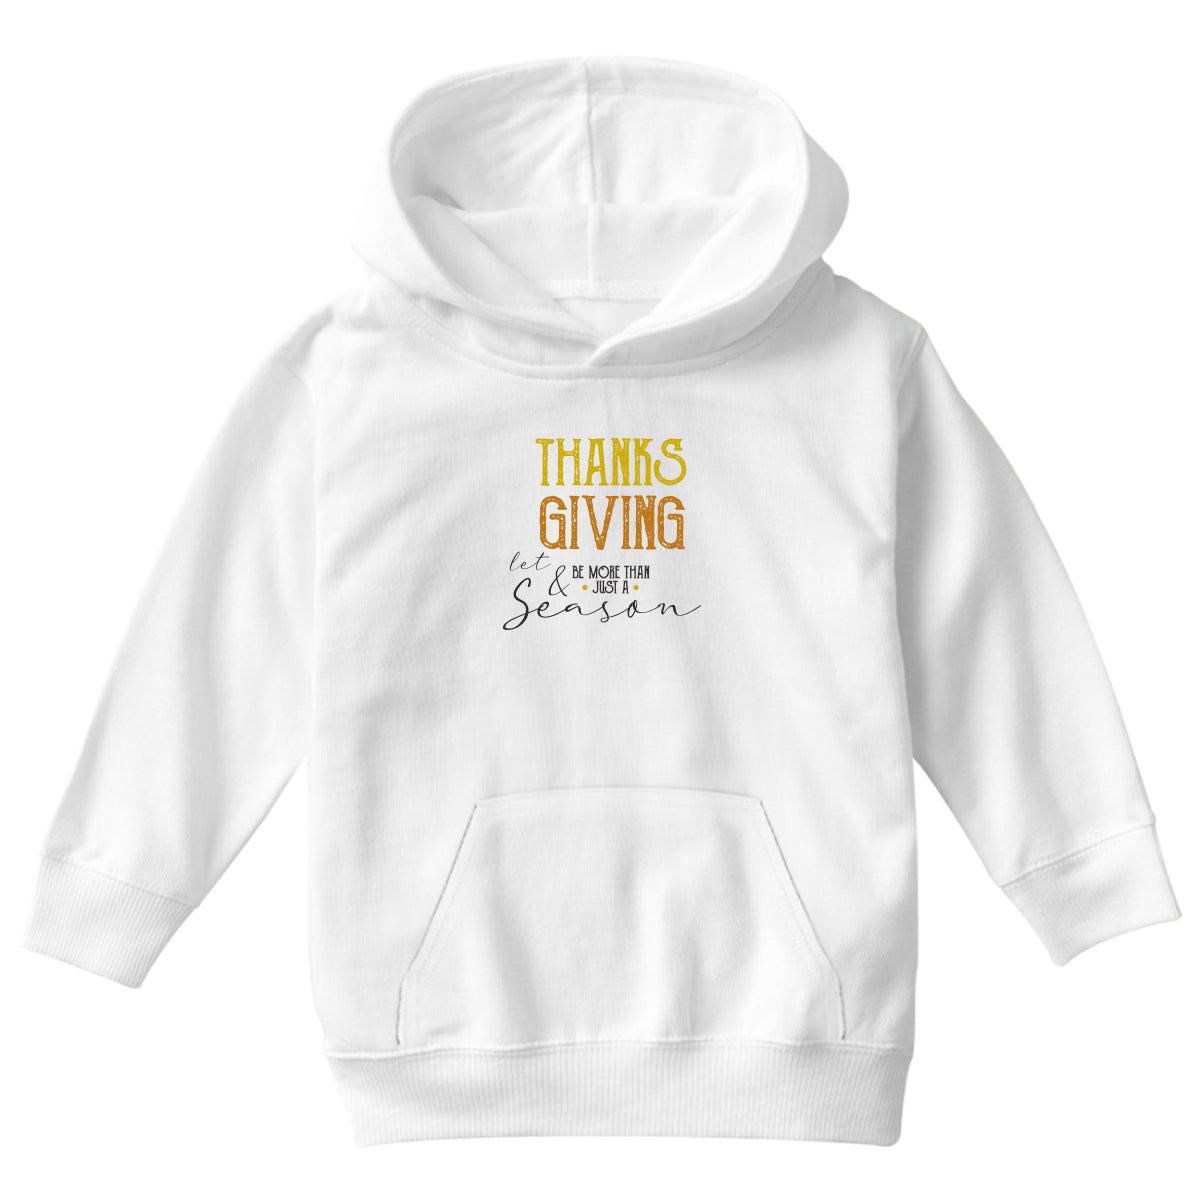 Thanks and Giving  Kids Hoodie